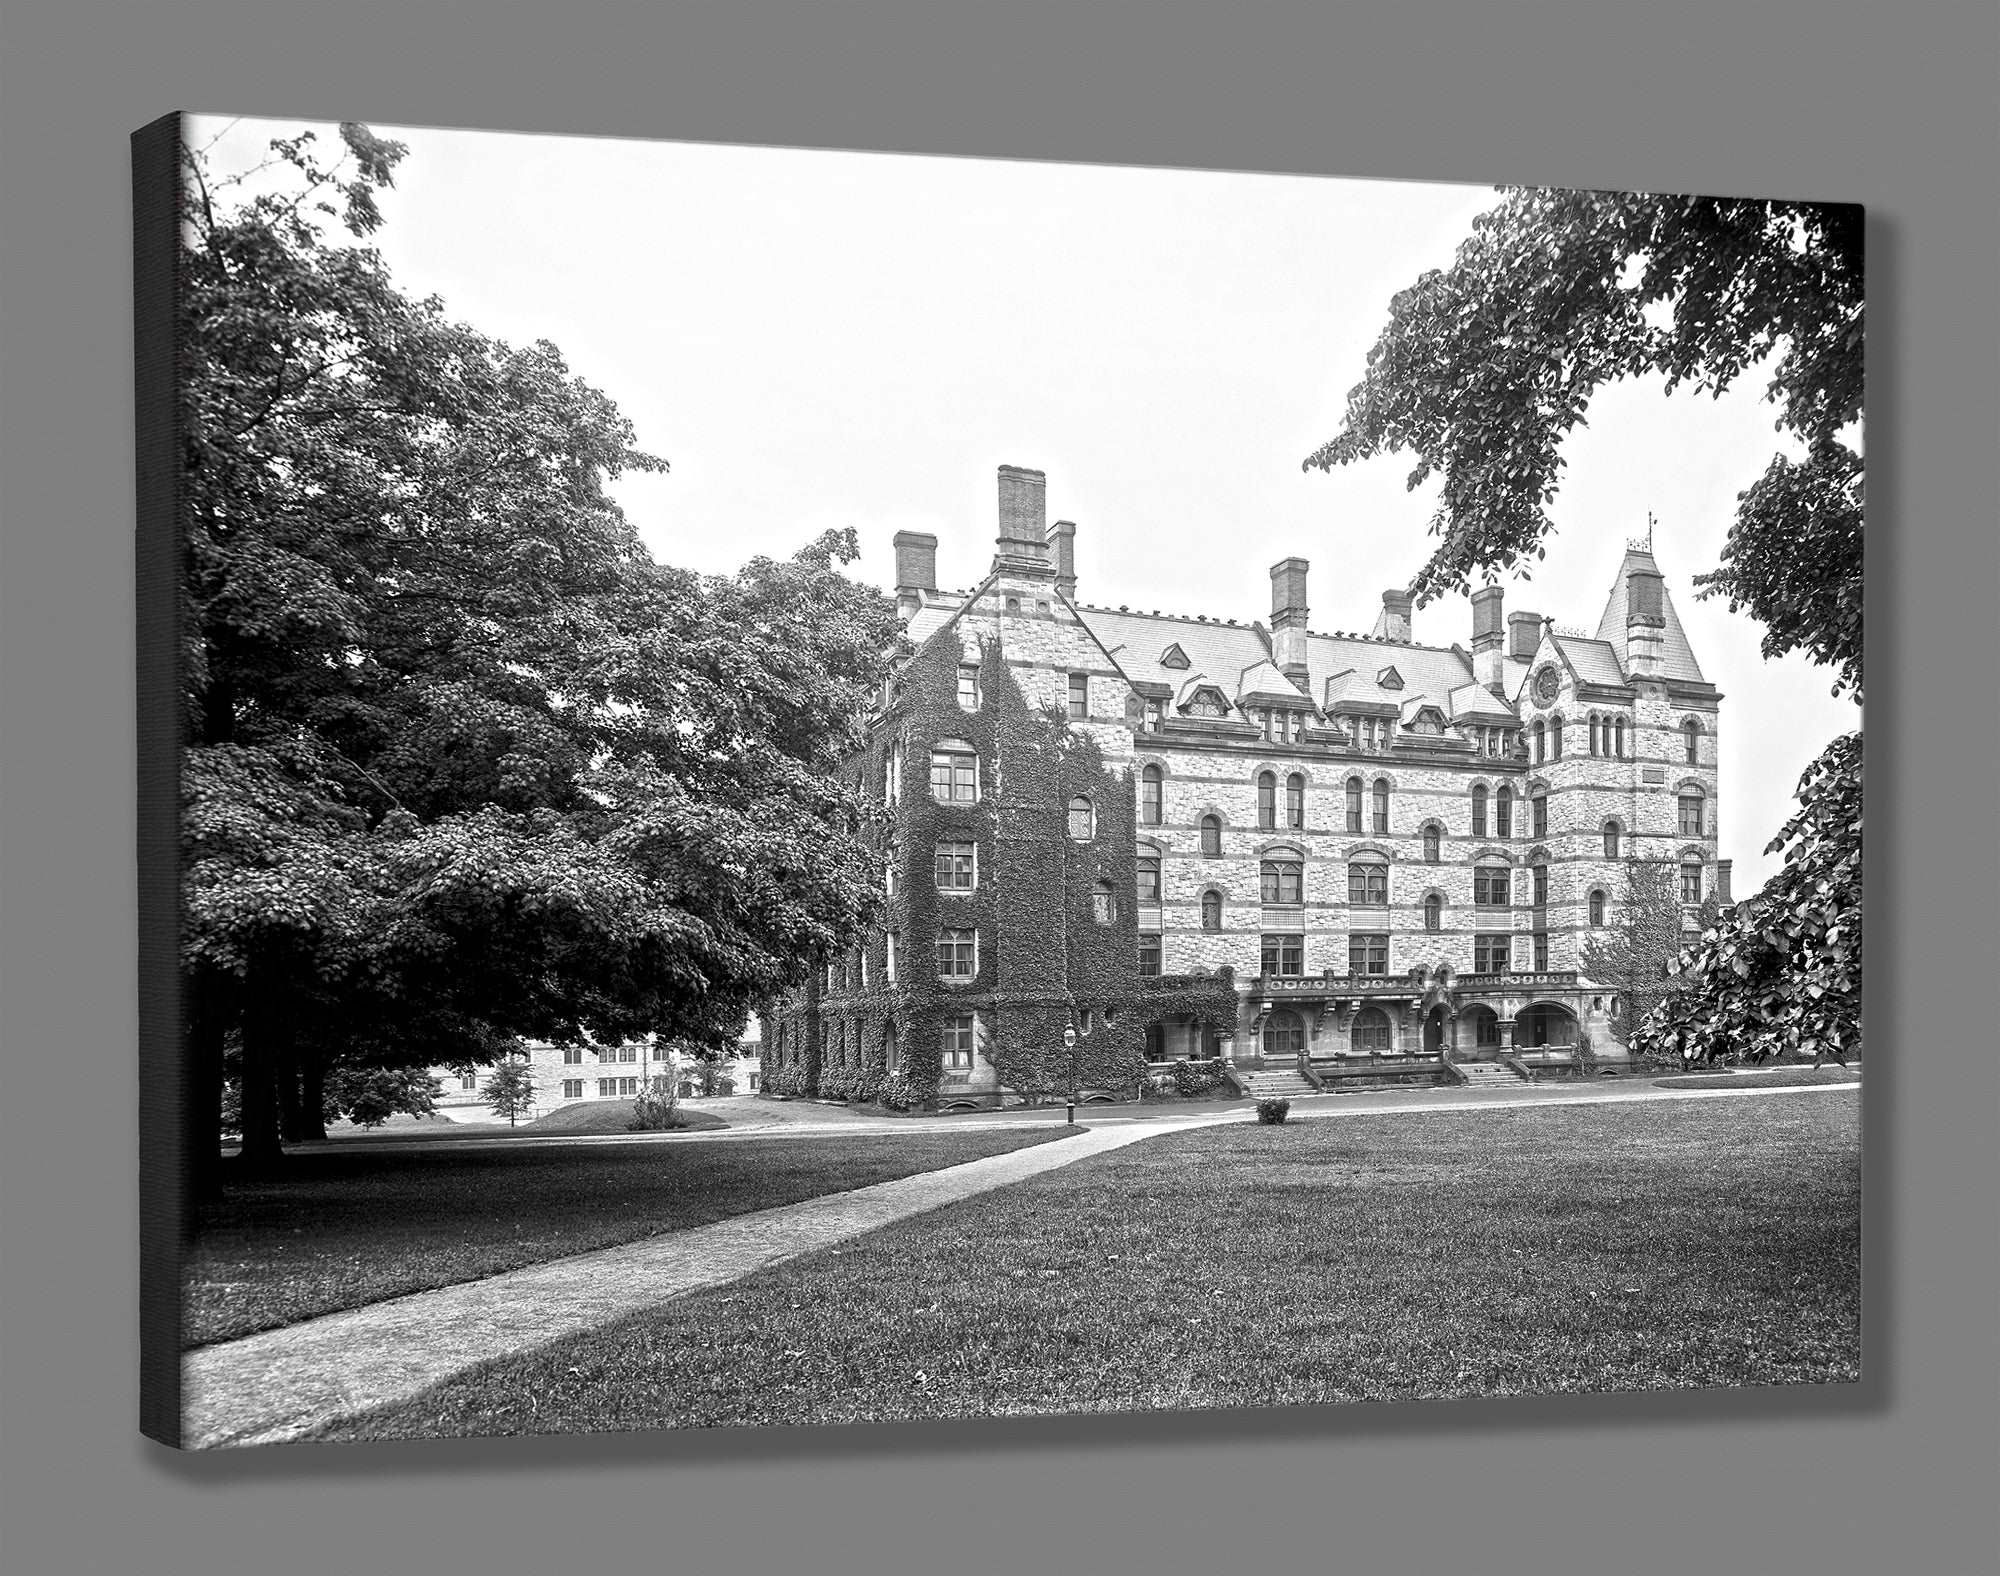 A canvas print mockup of a black and white photograph of Witherspoon Hall at Princeton University